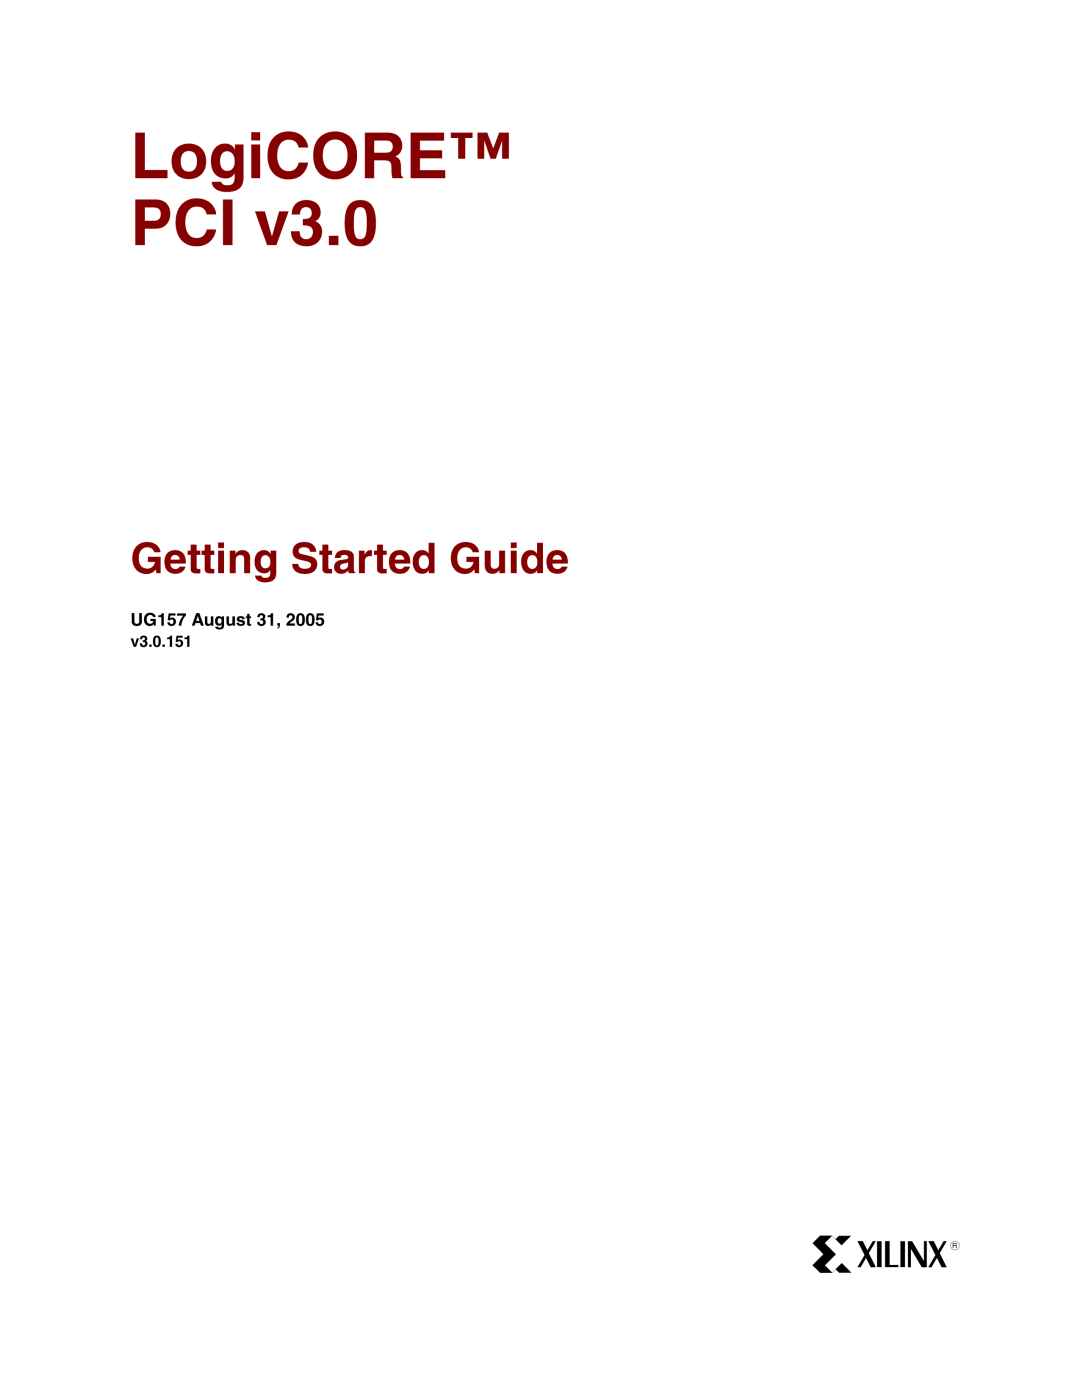 Xilinx PCI v3.0 manual UG157 August 31, LogiCORE PCI, Getting Started Guide, v3.0.151 